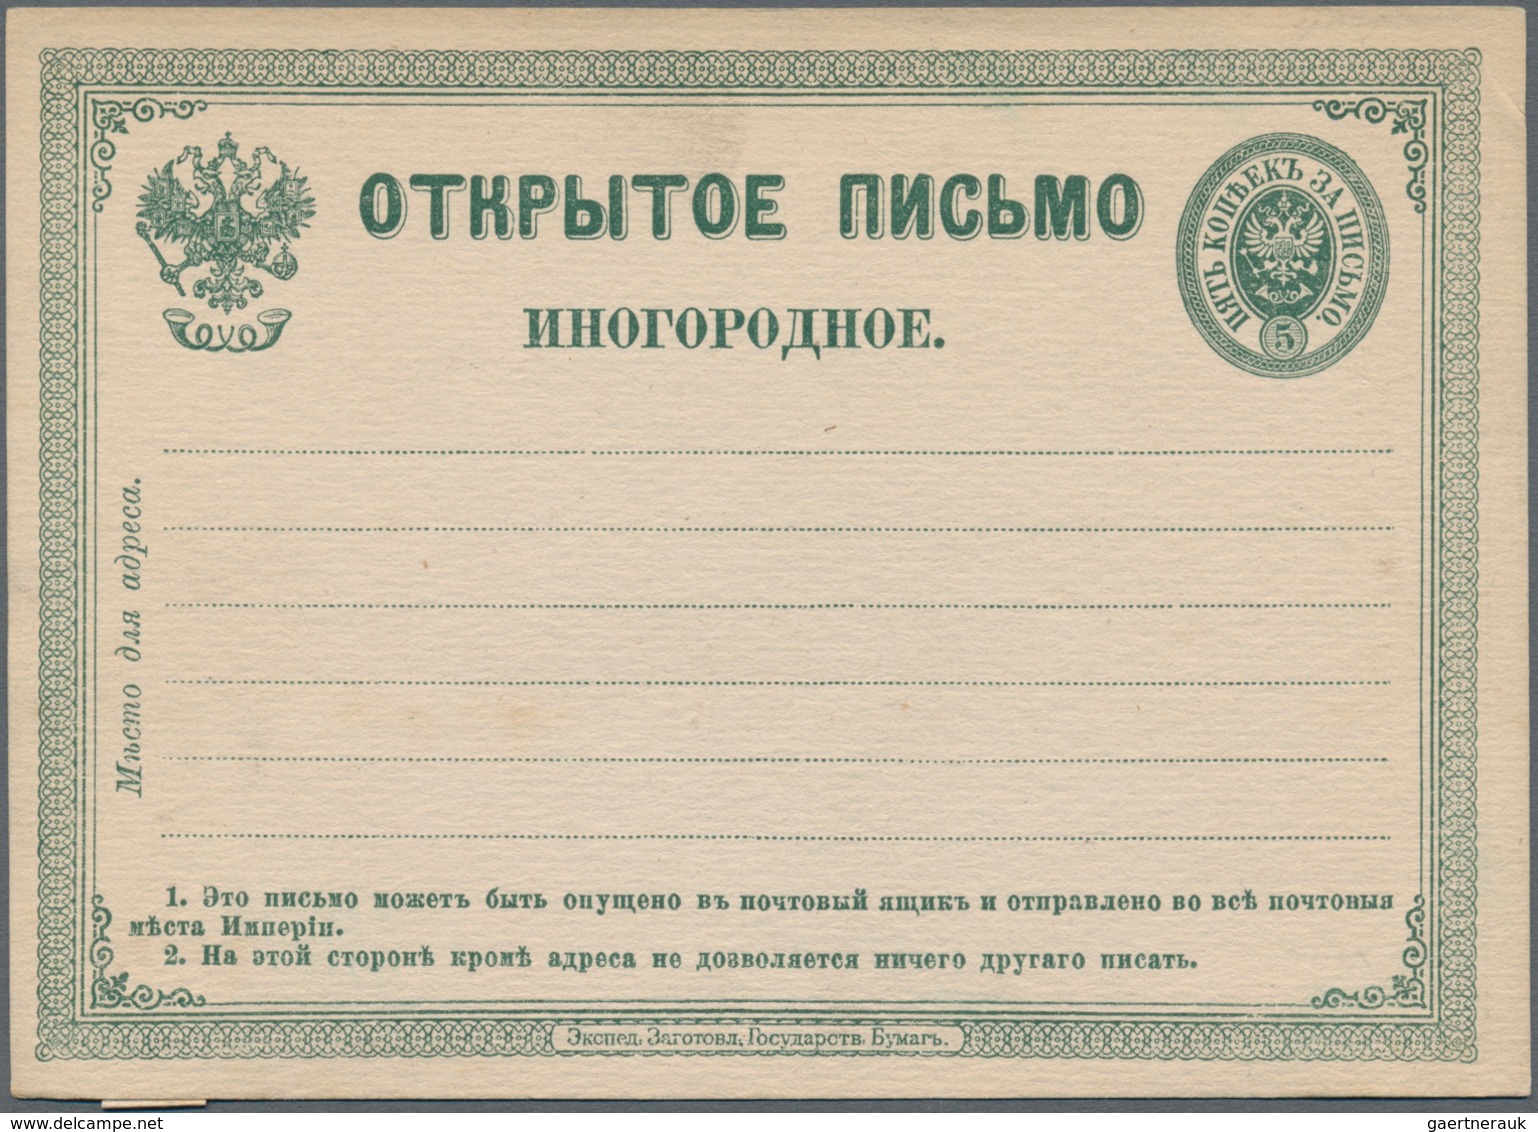 Russland - Ganzsachen: 1873/1916 (ca.) holding of about 170 postal stationery, cards, envelopes, wra